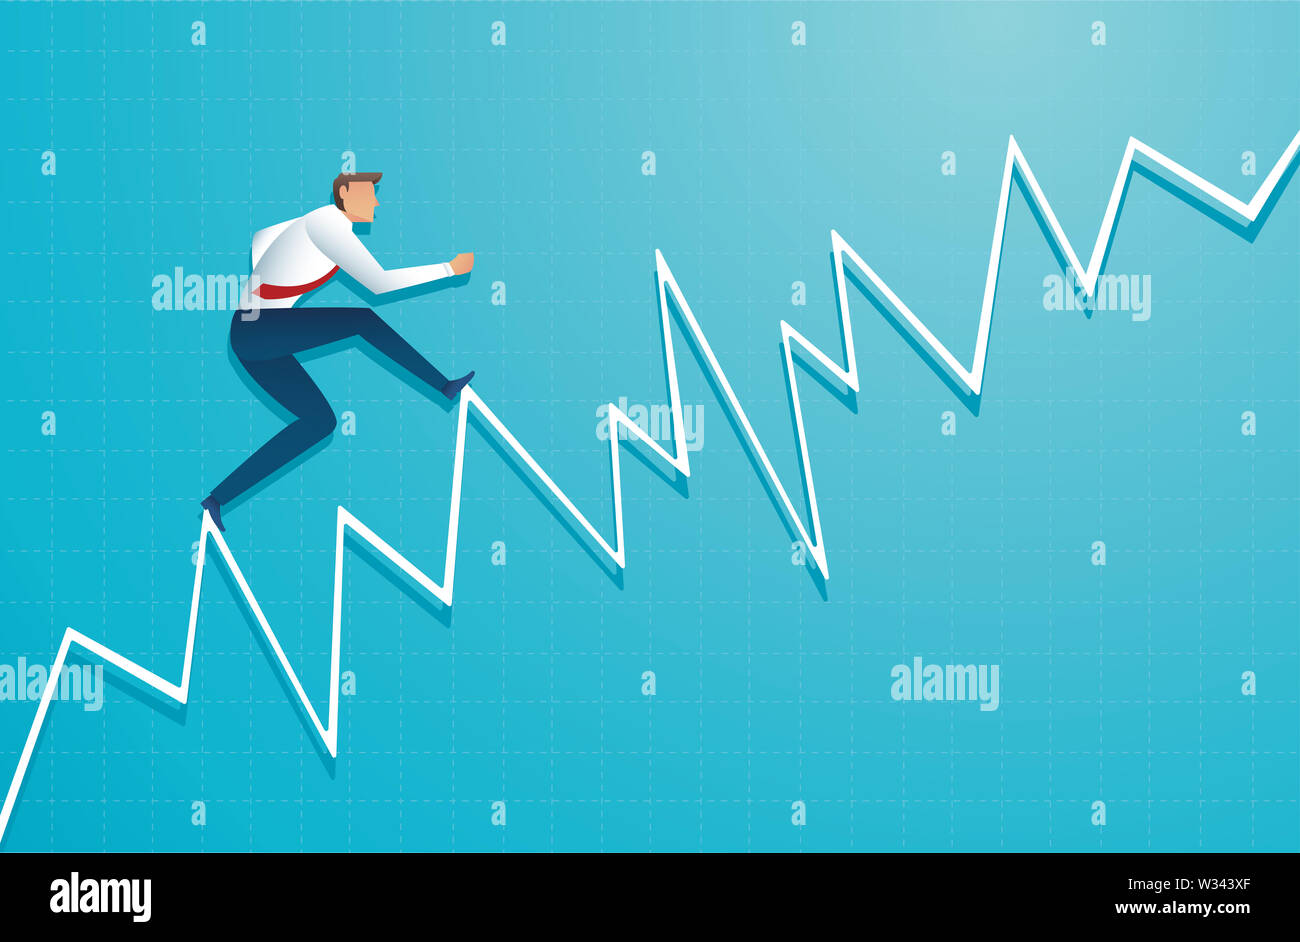 businessman runs on graph, the employee running up to the top of arrow, Success, achievment, motivation business symbol vector illustration EPS10 Stock Photo